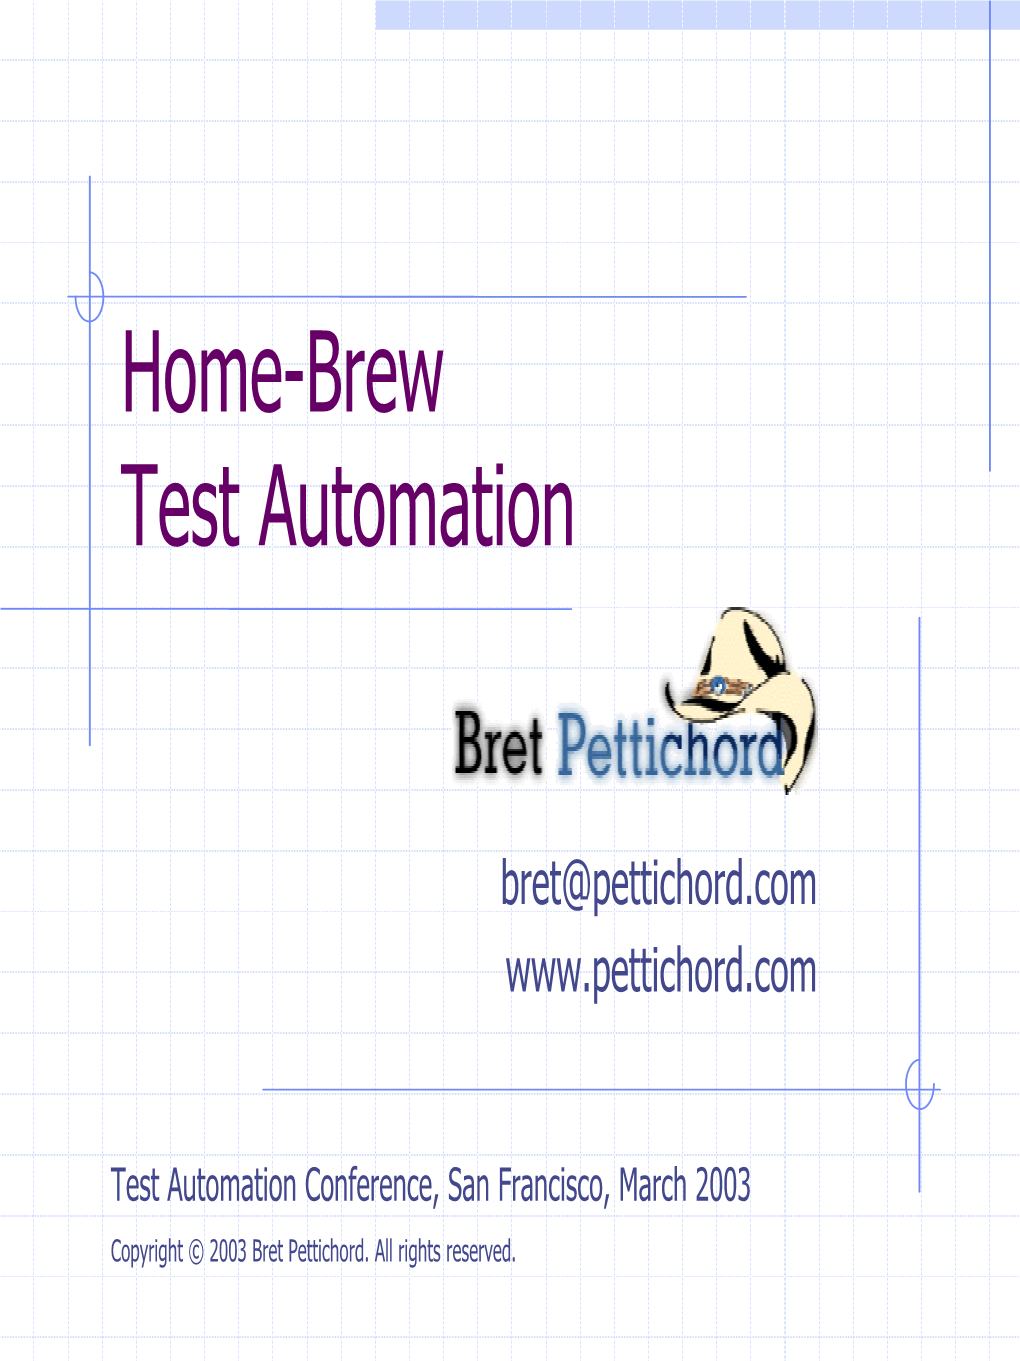 Home-Brew Test Automation